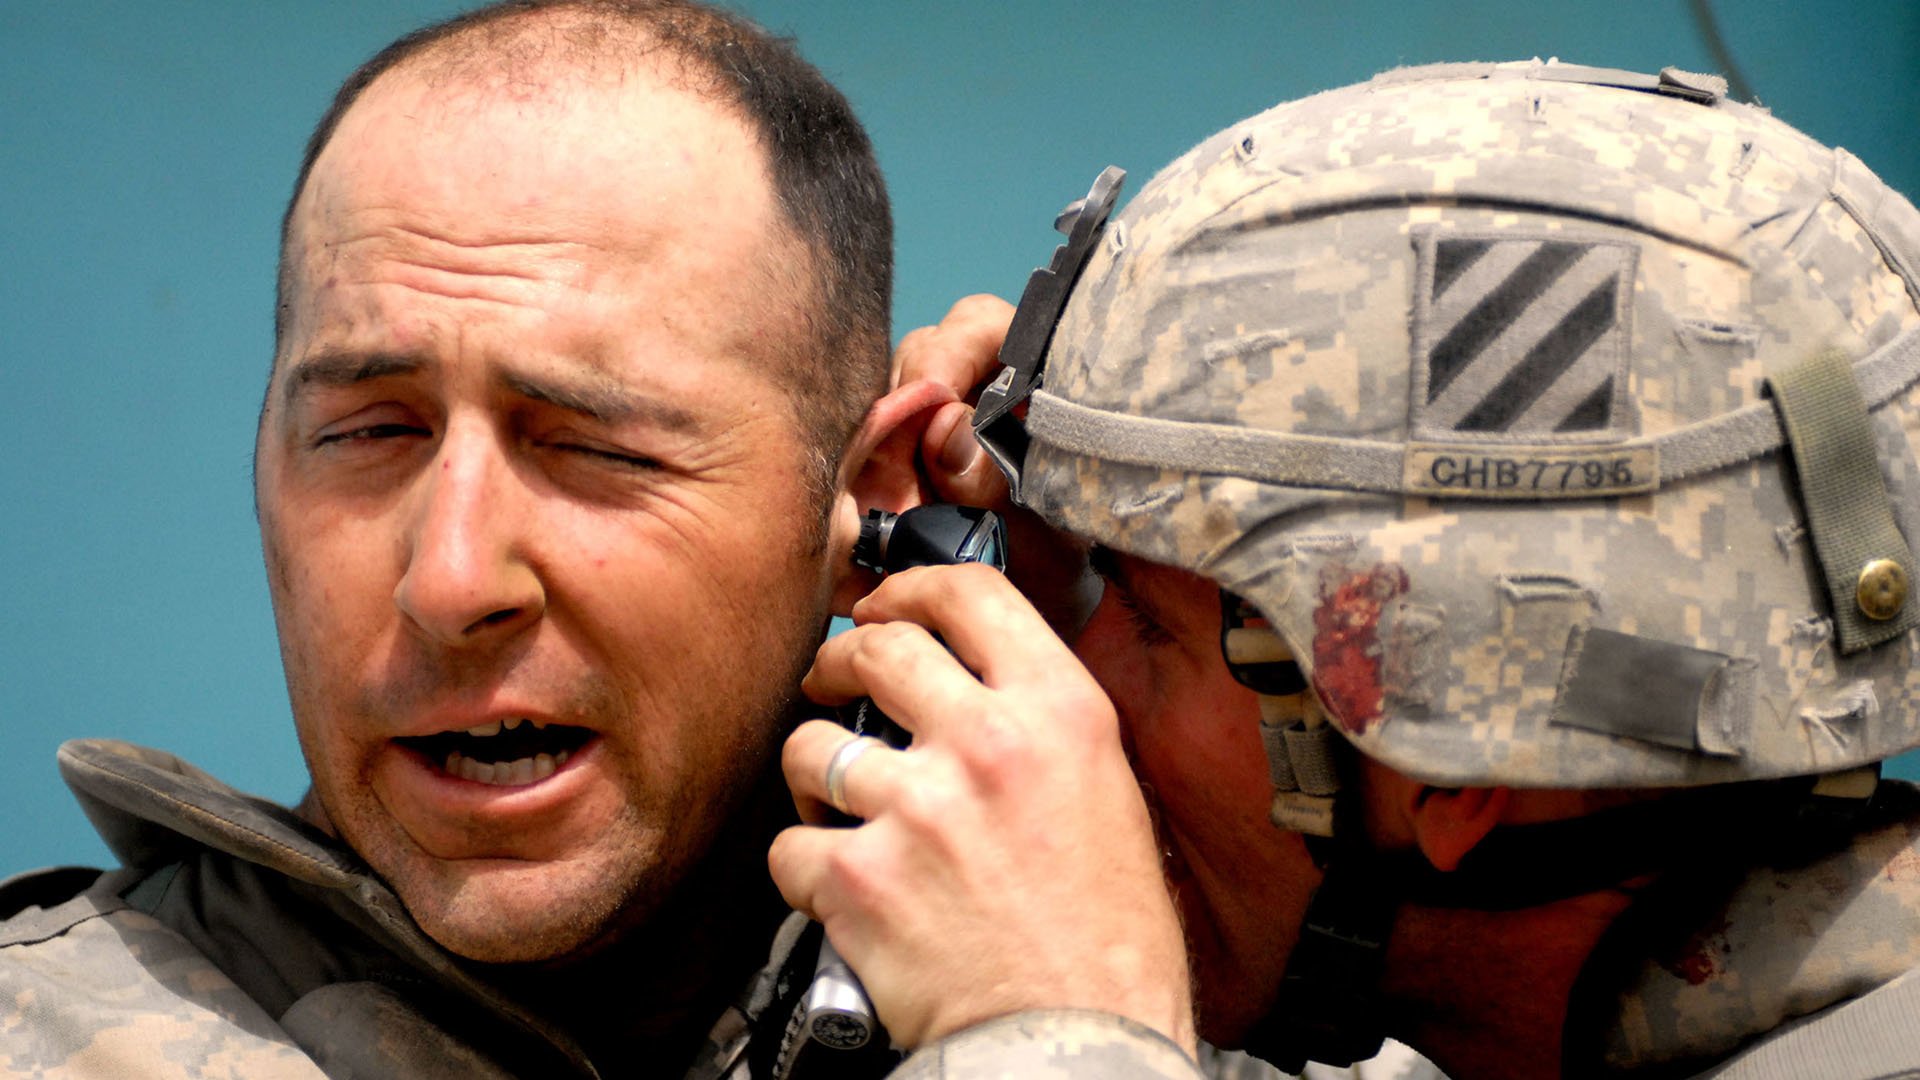 A medic examines a soldier's ear following an explosion at Joint Security Station Sadr City in the Thawra 1 neighborhood of Baghdad. US Army photo by Sgt. Zach Mott.